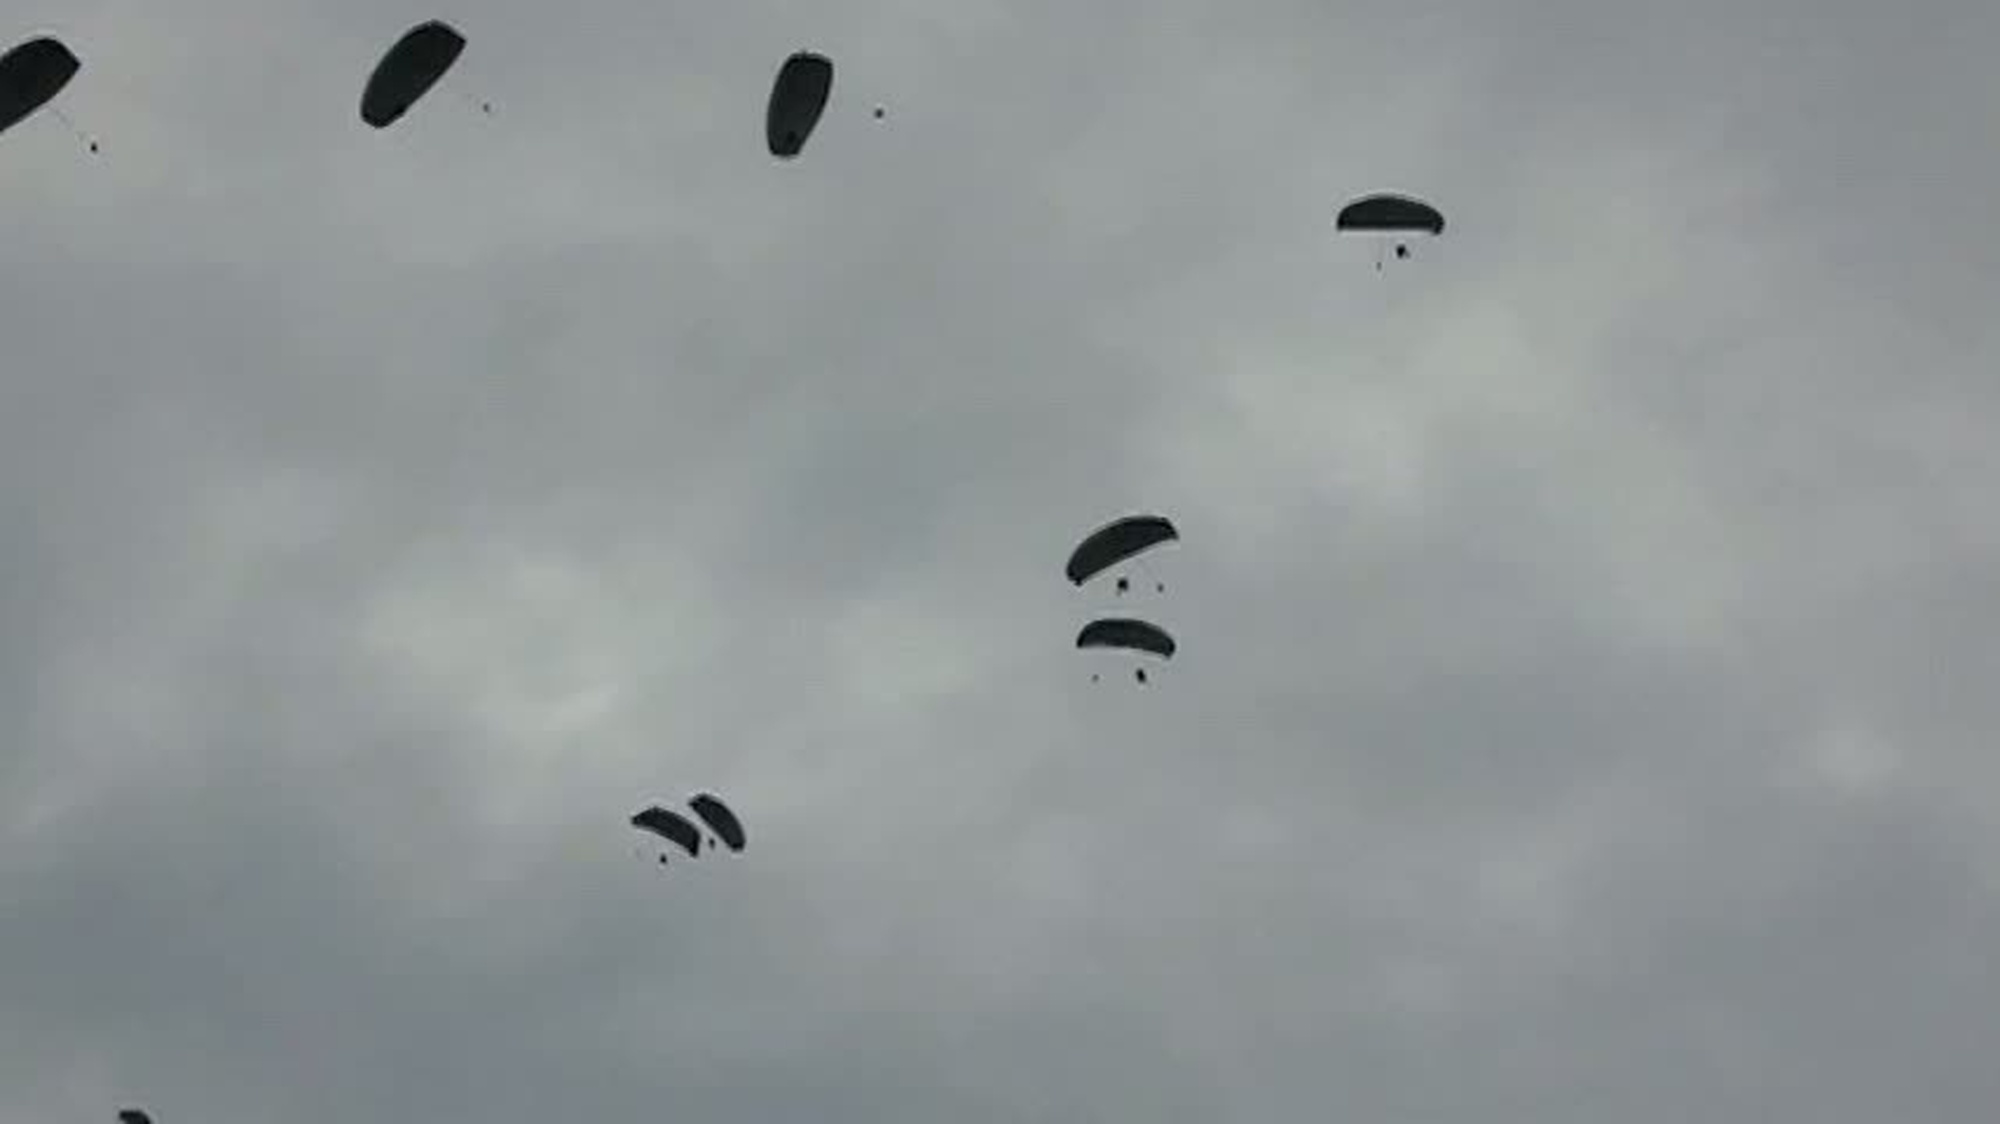 U.S. paratroopers using T-11 parachutes, conduct an airborne operation from  a C-130 Hercules aircraft